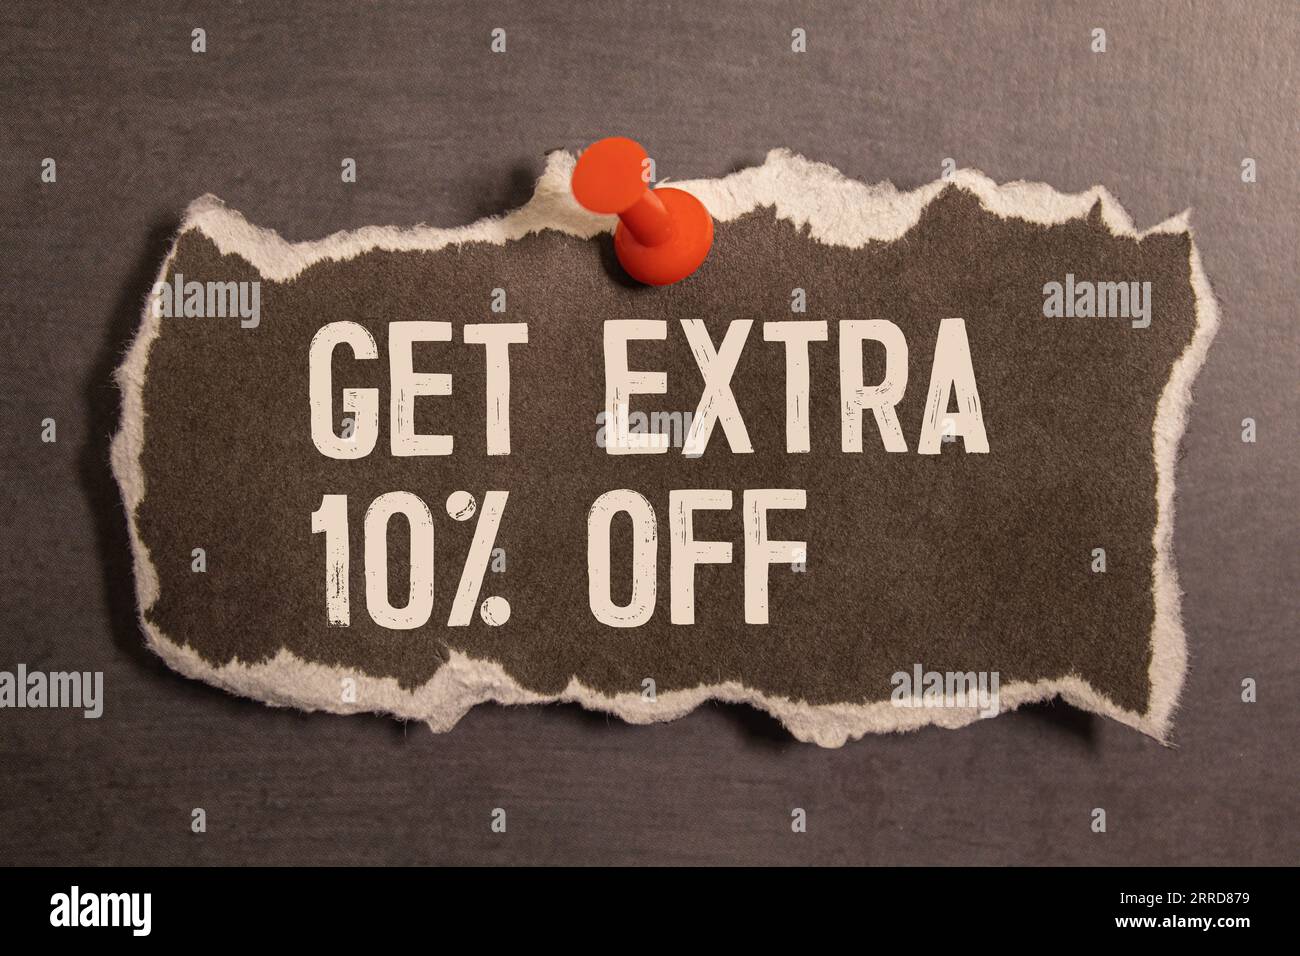 GET EXTRA 10 OFF percent text on a brown tag on a red paper background. Stock Photo